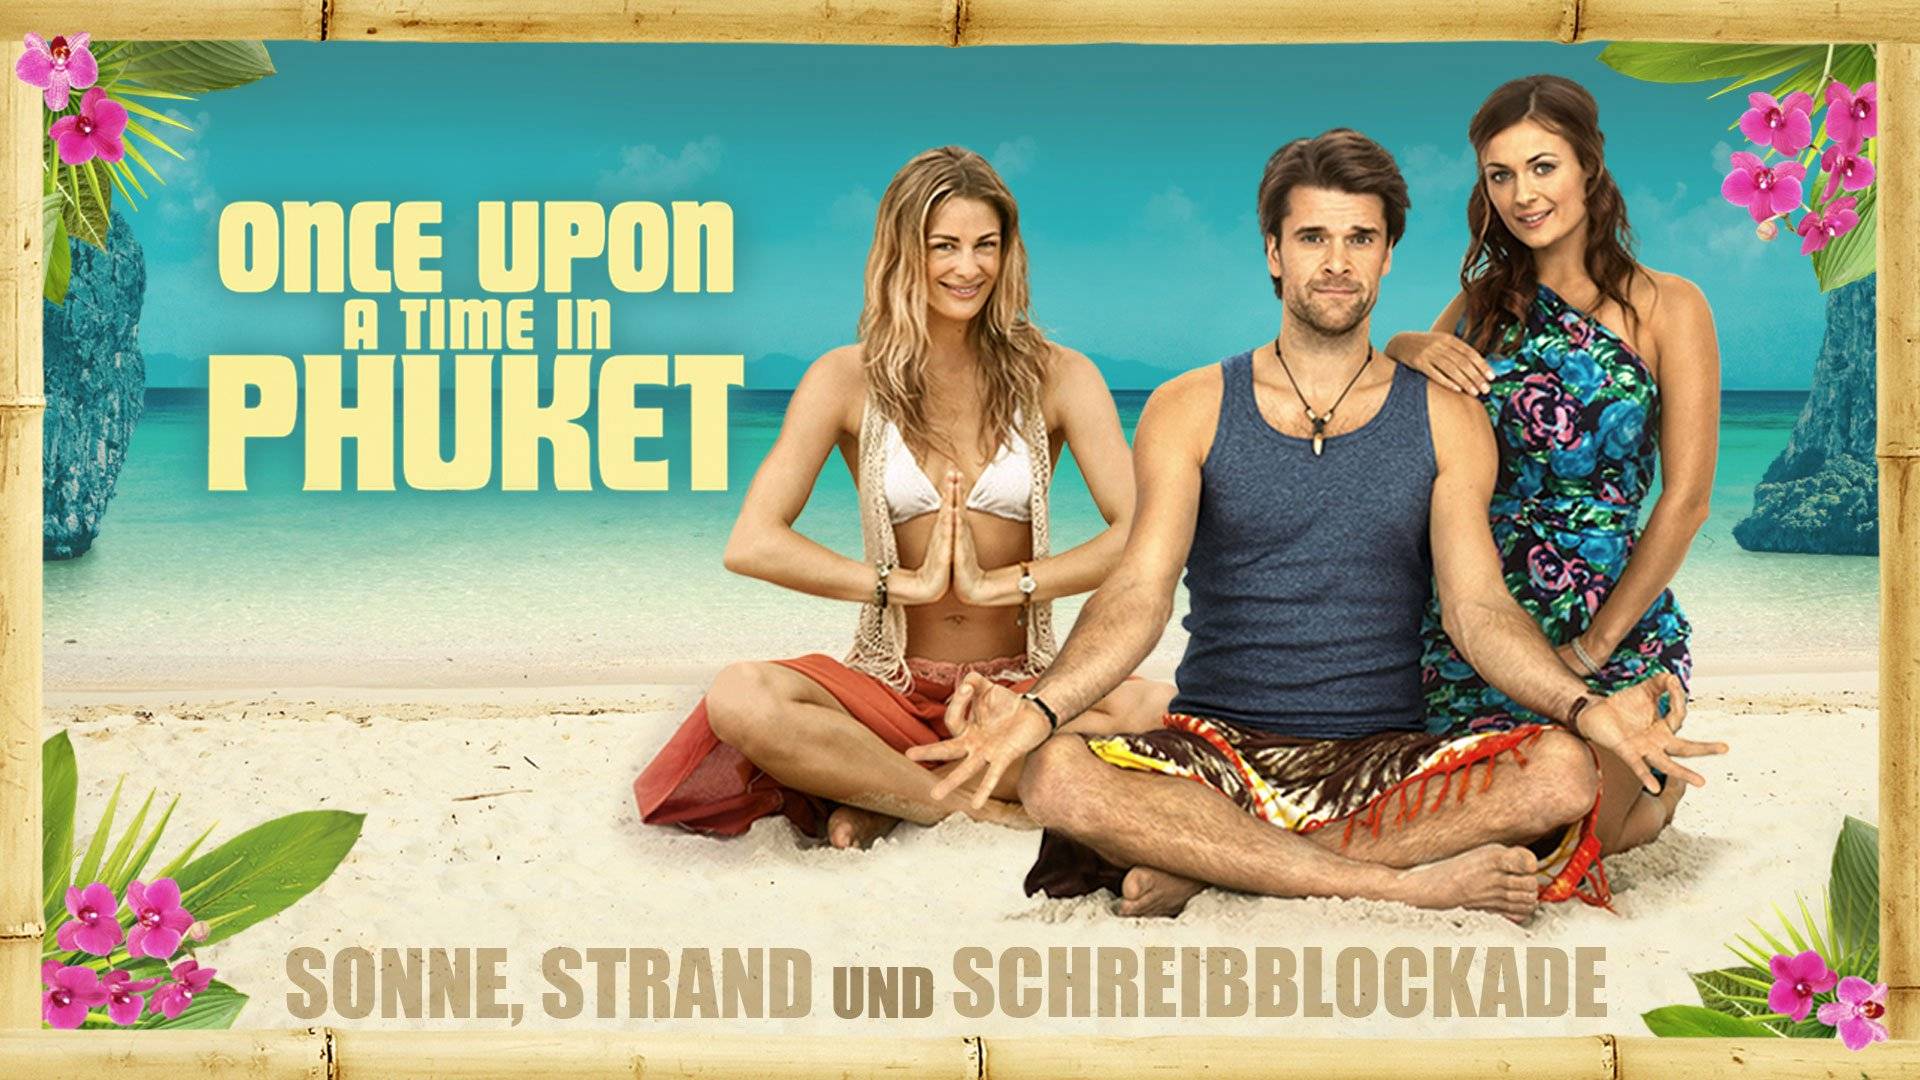 Once Upon A Time in Phuket (2012)